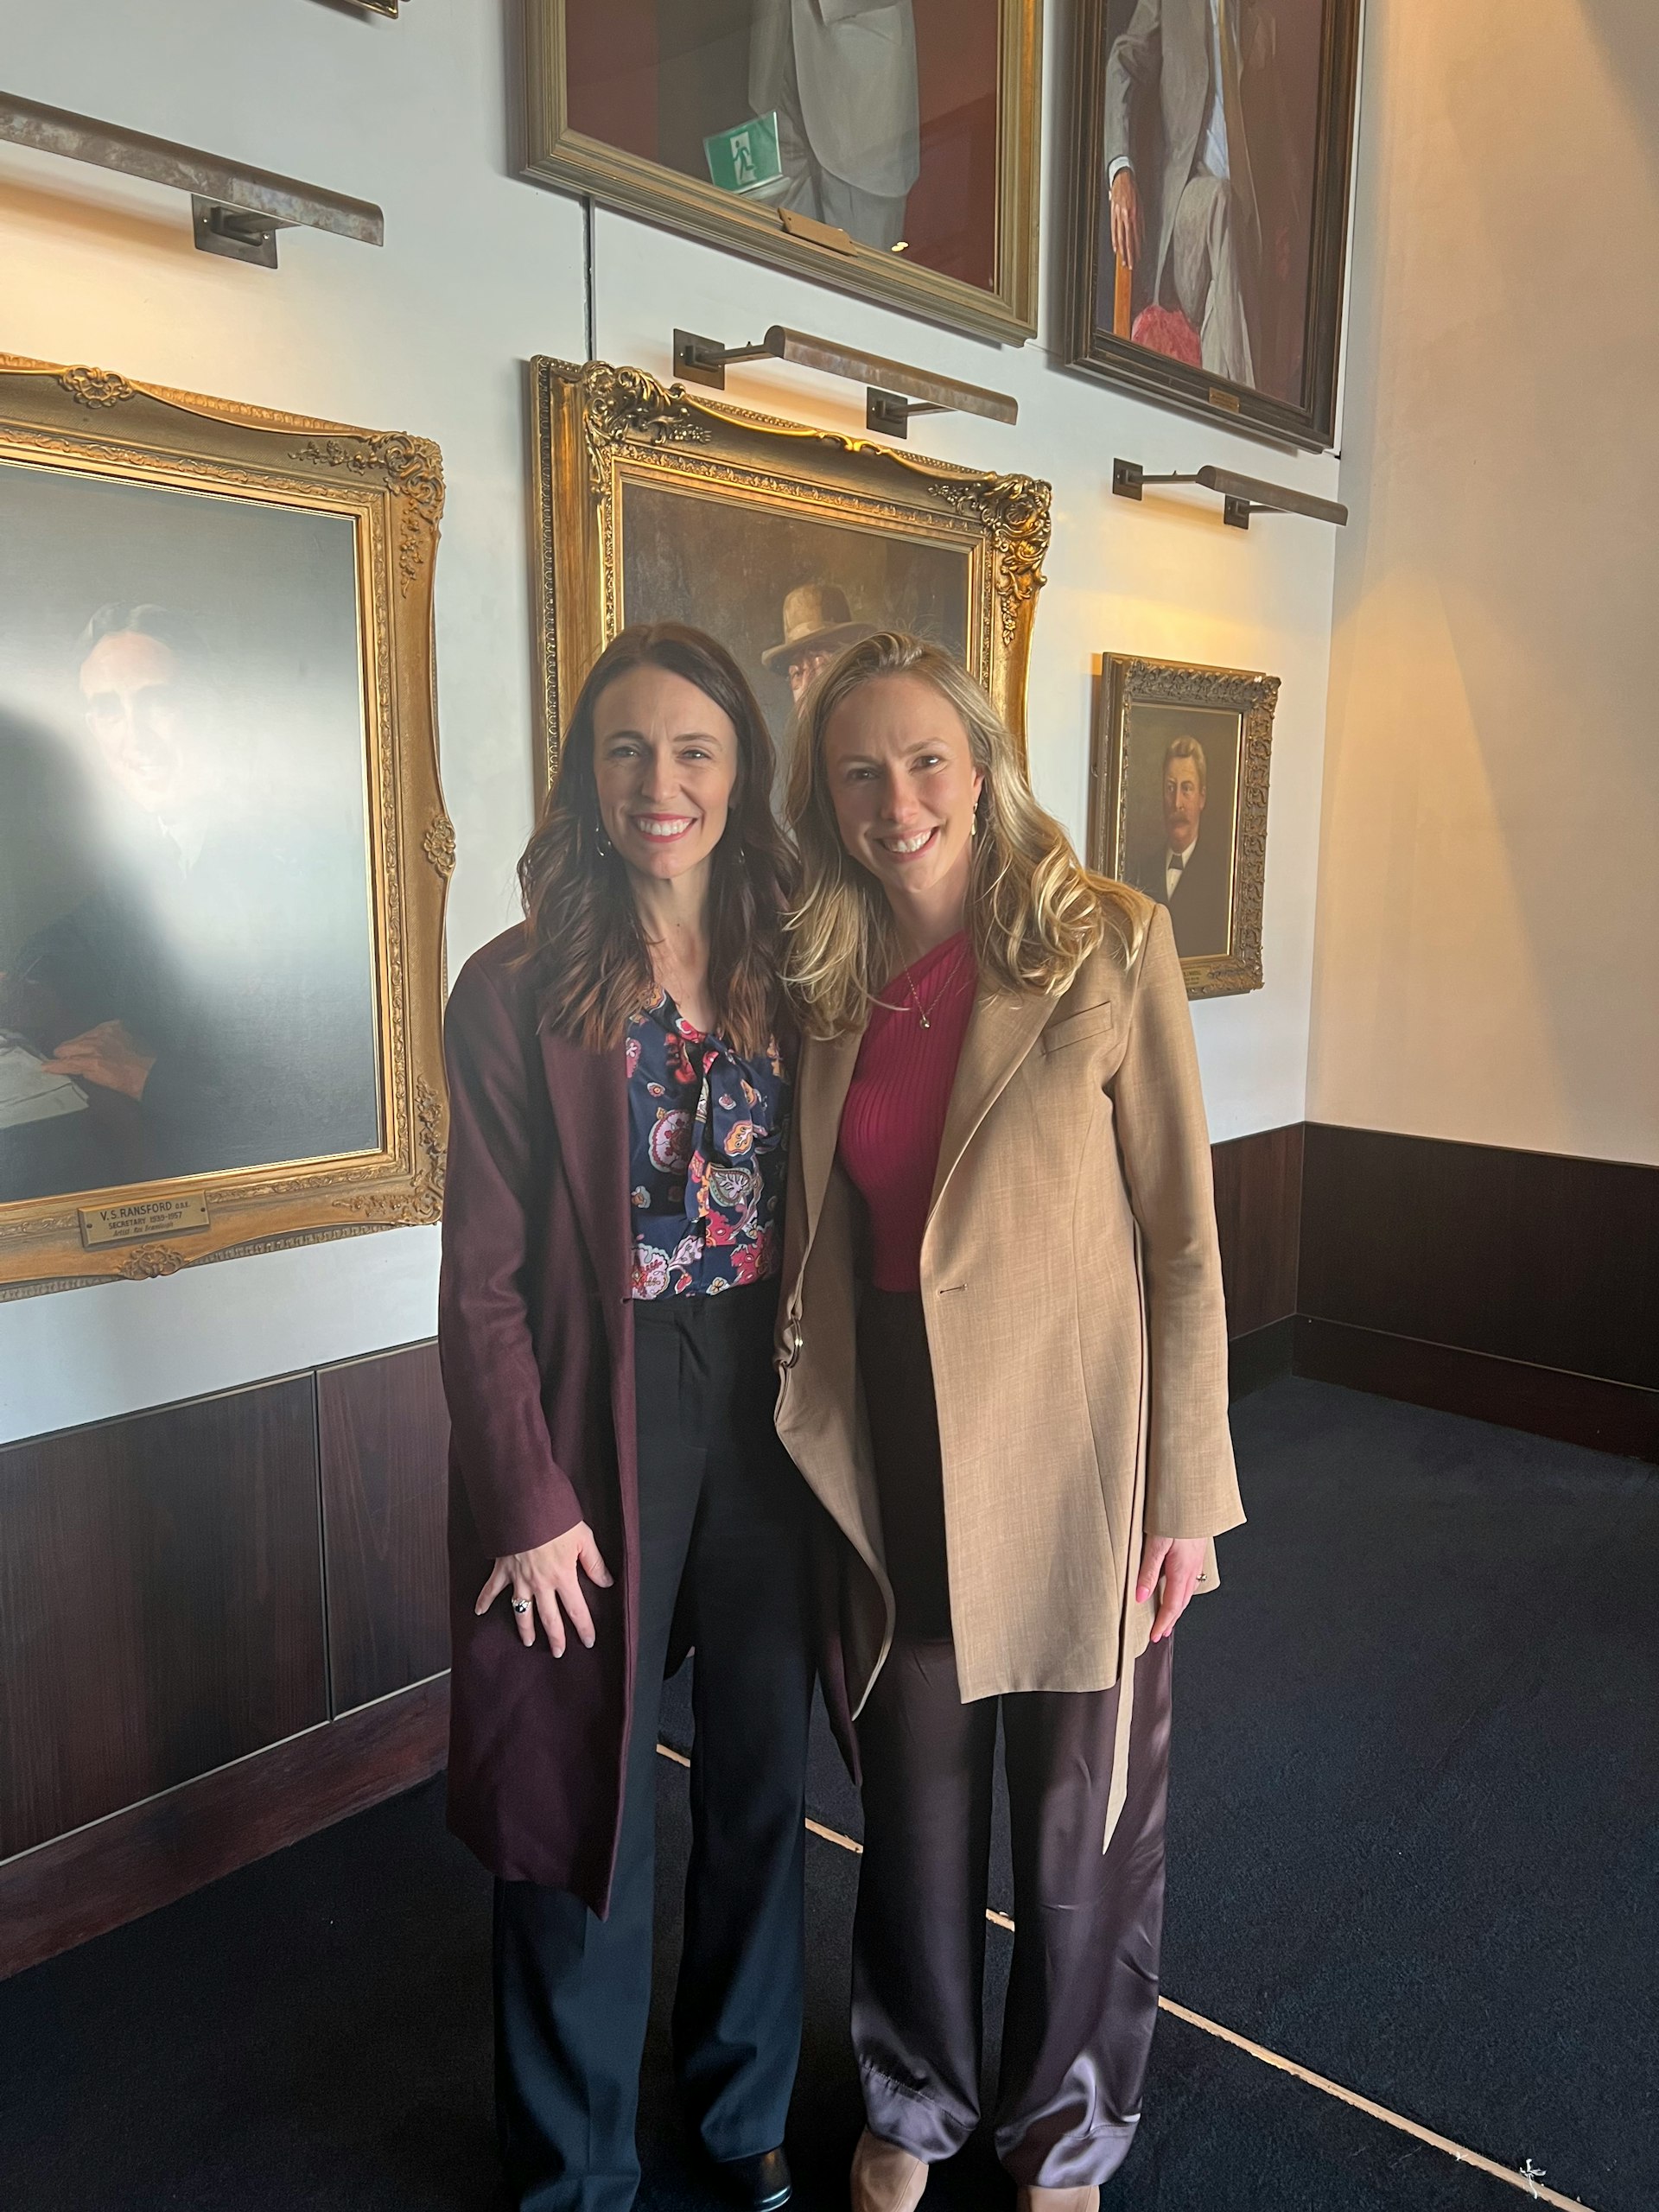 A photo of two women—Prime Minister Jacinda Ardern on the left, and Sharesies 3EO Brooke Roberts on the right. Both women are smiling into the camera, in front of a wall decorated with painted portraits. 